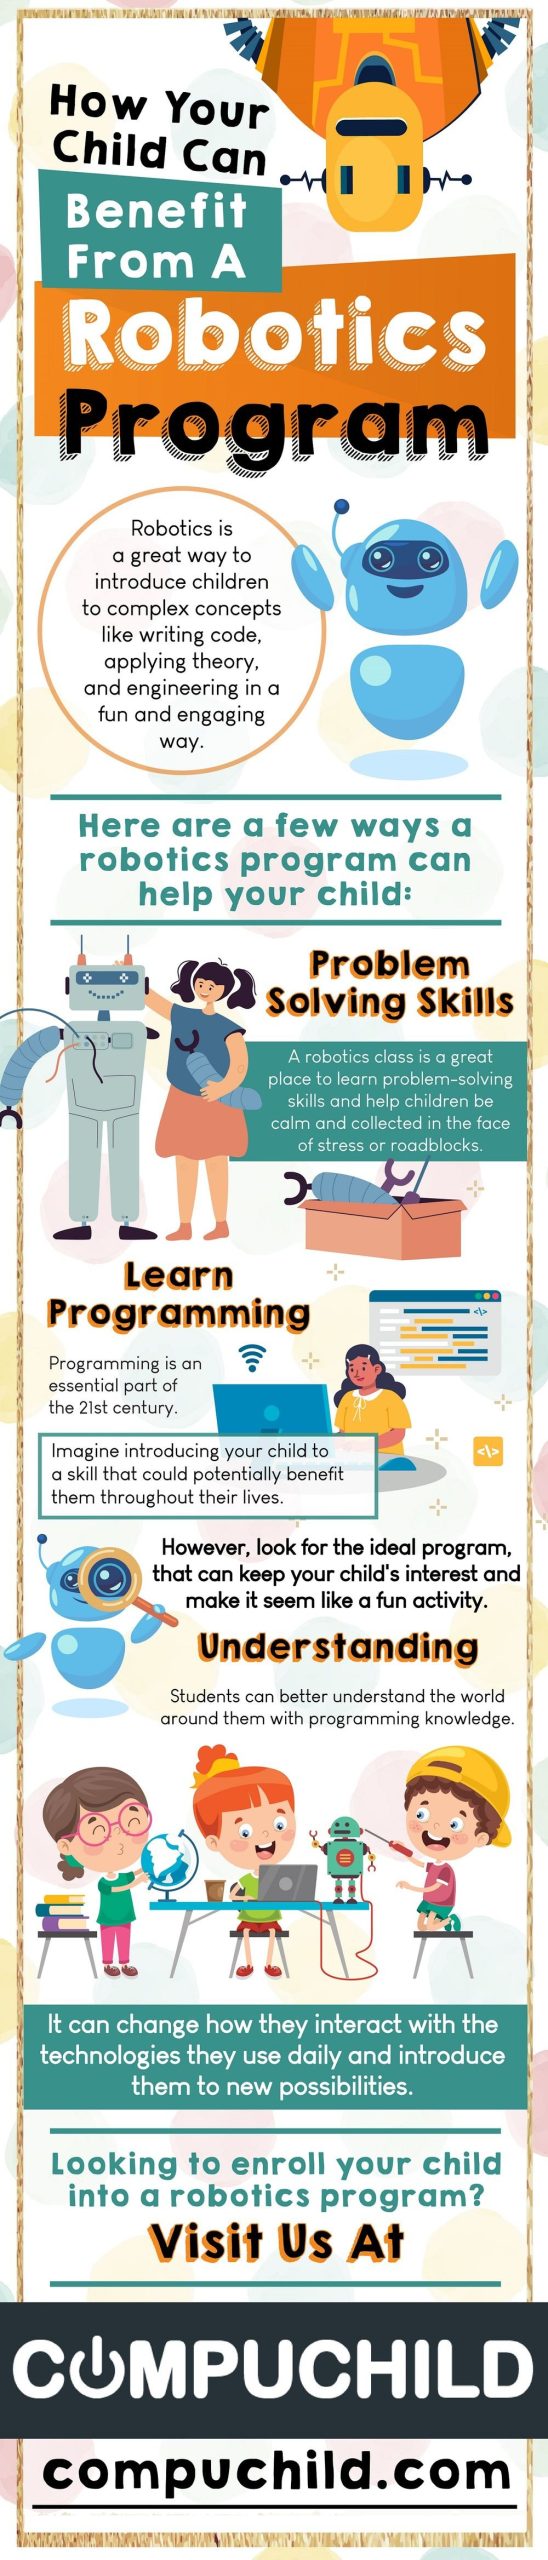 How your child can benefit from robotics program_jpg_85